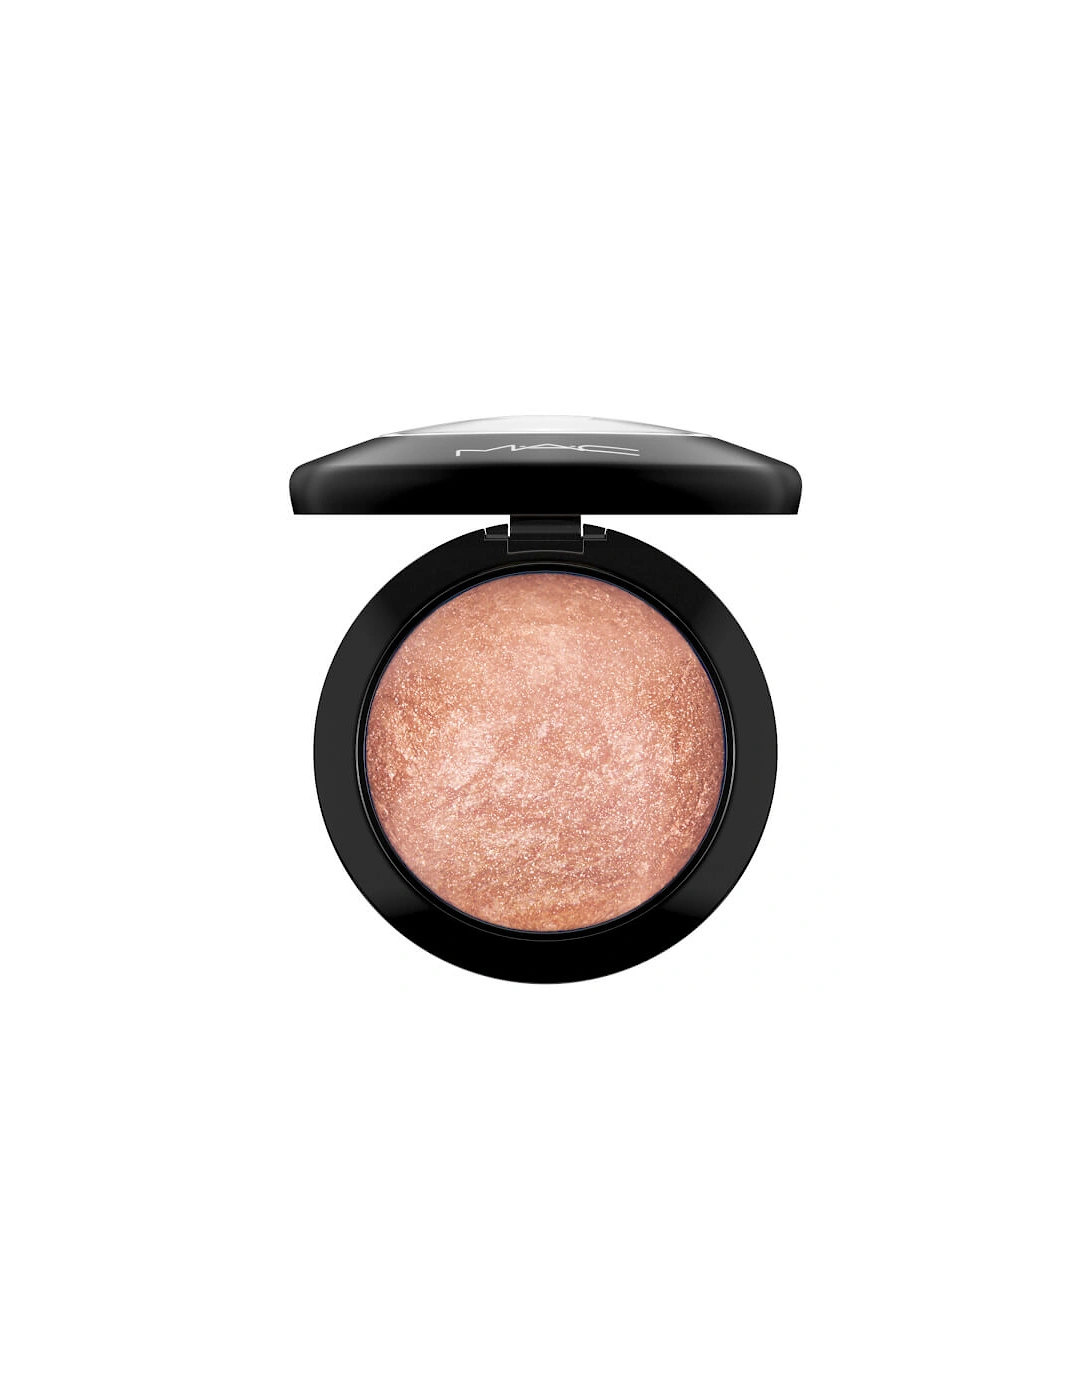 Mineralize Skinfinish Highlighter - Cheeky Bronze, 2 of 1